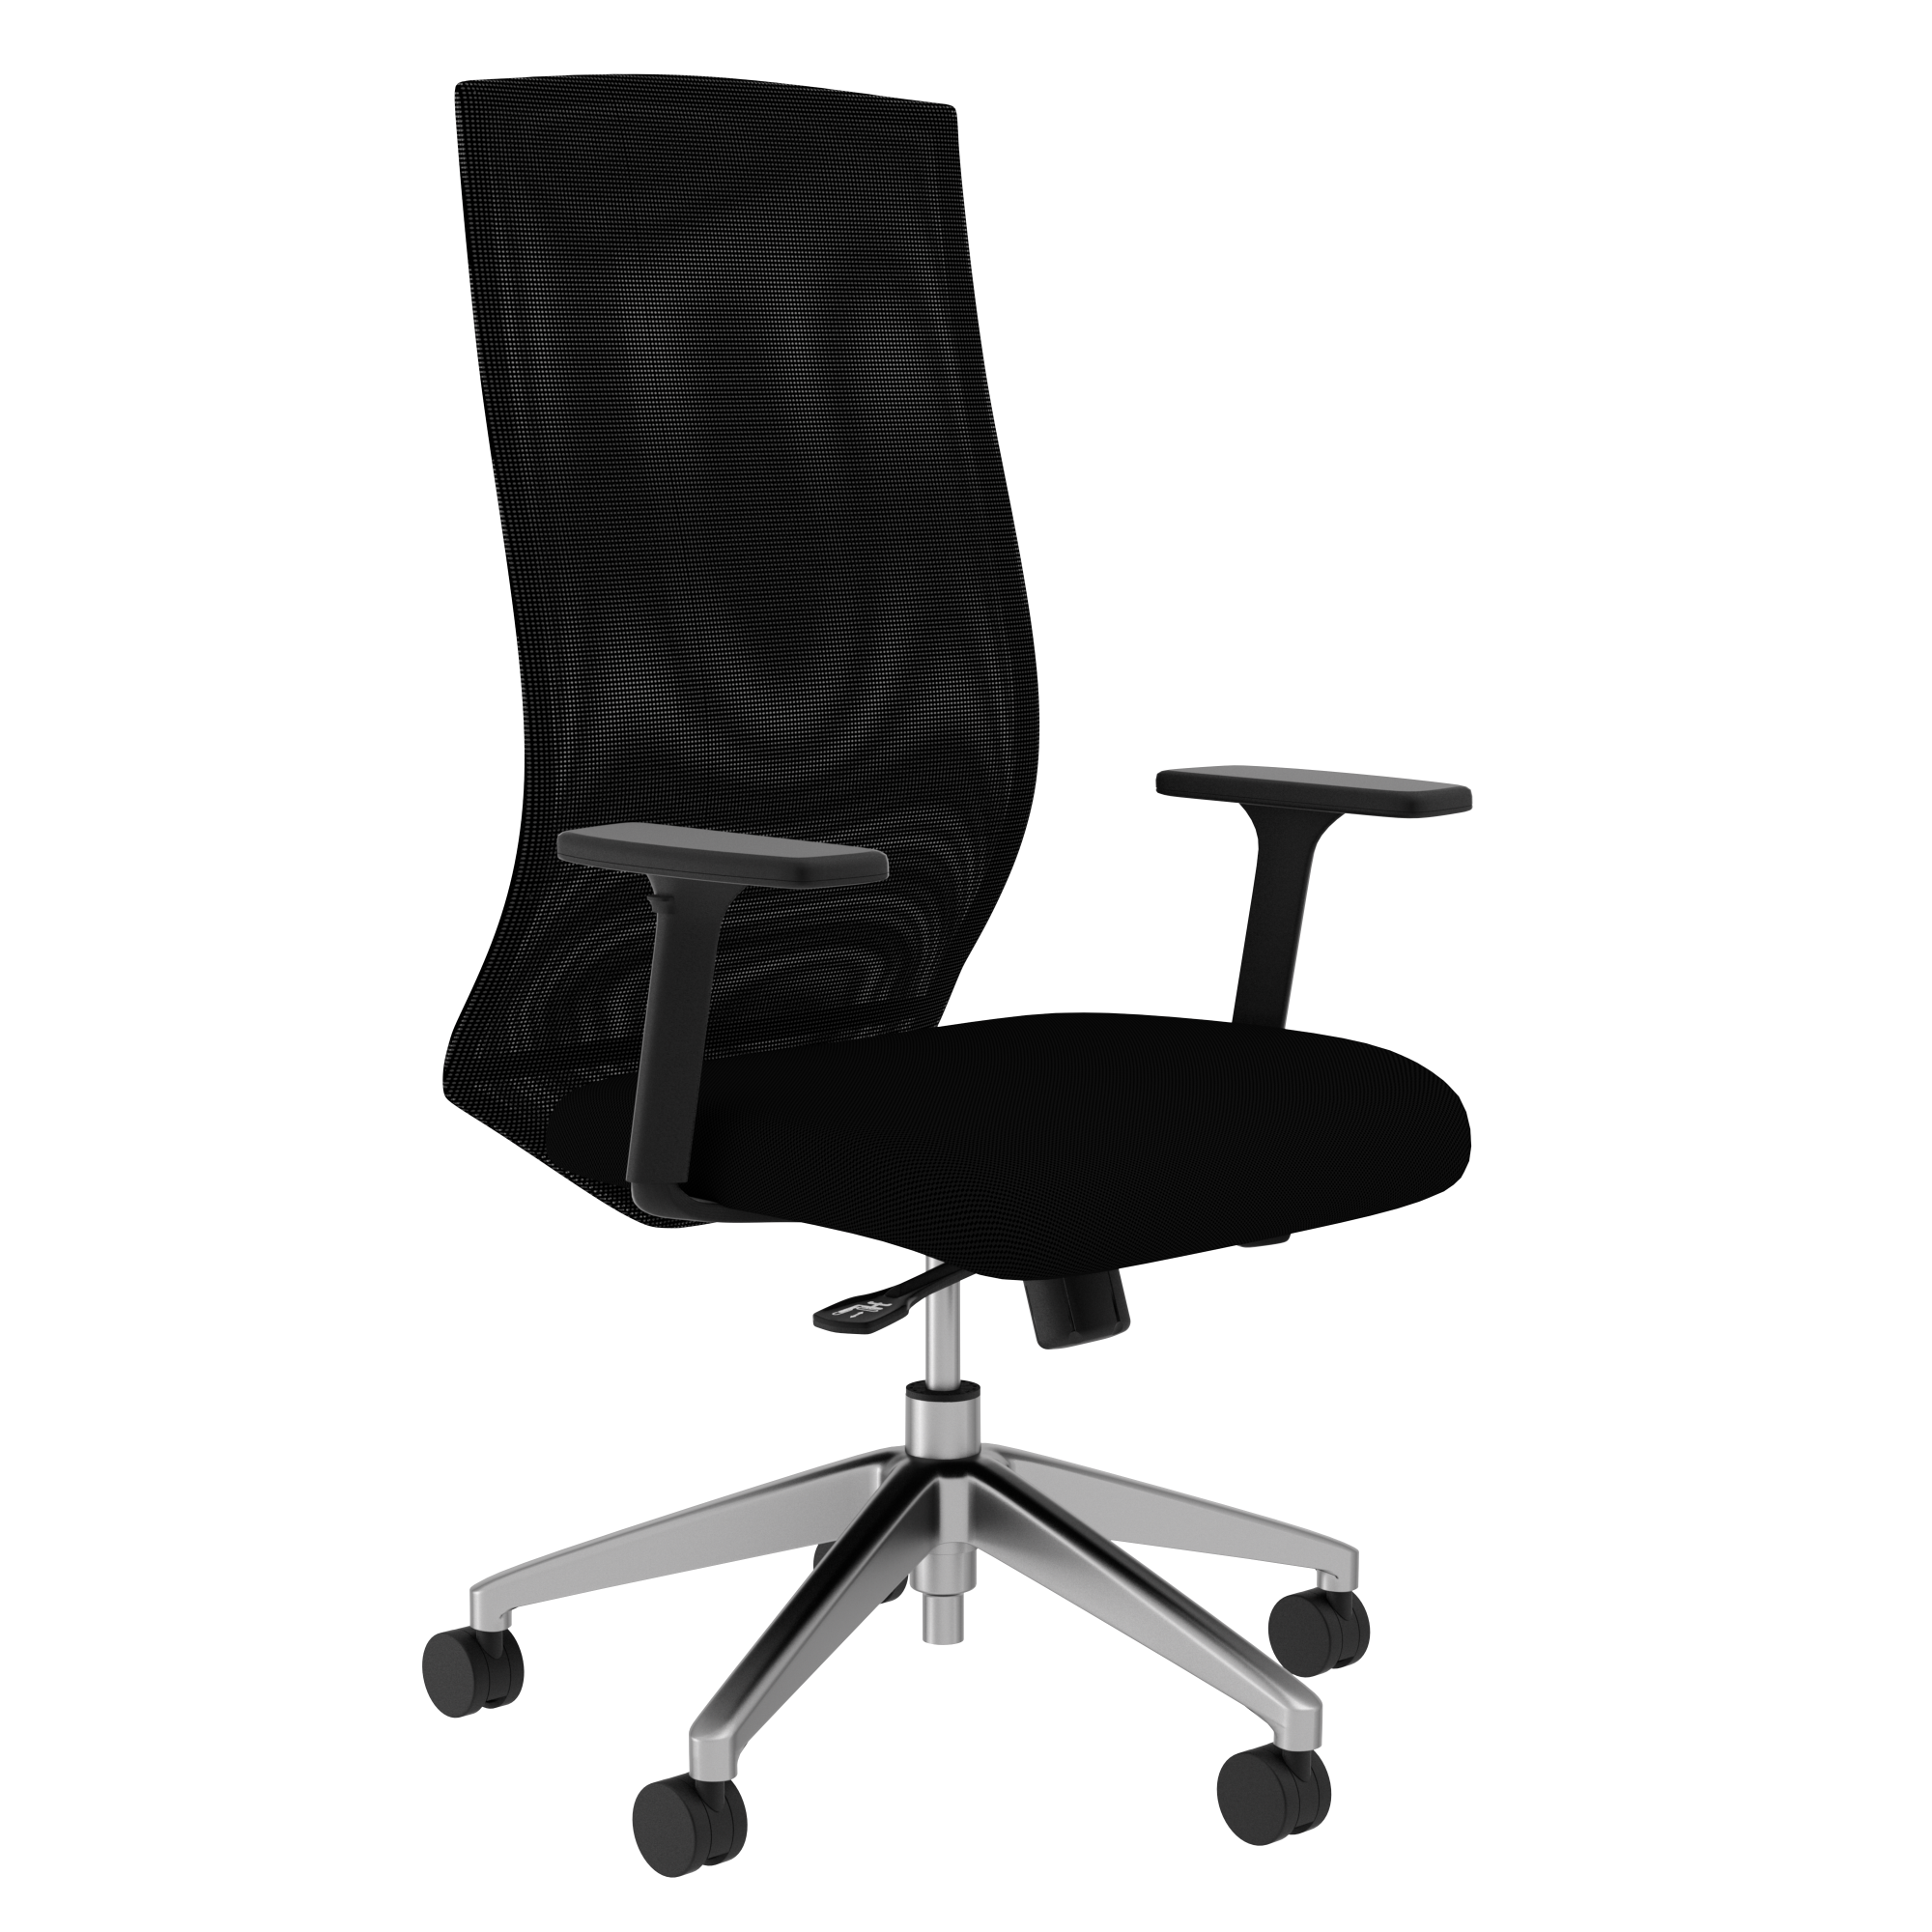 Cubicle Furniture from Compel - Maxim task chair